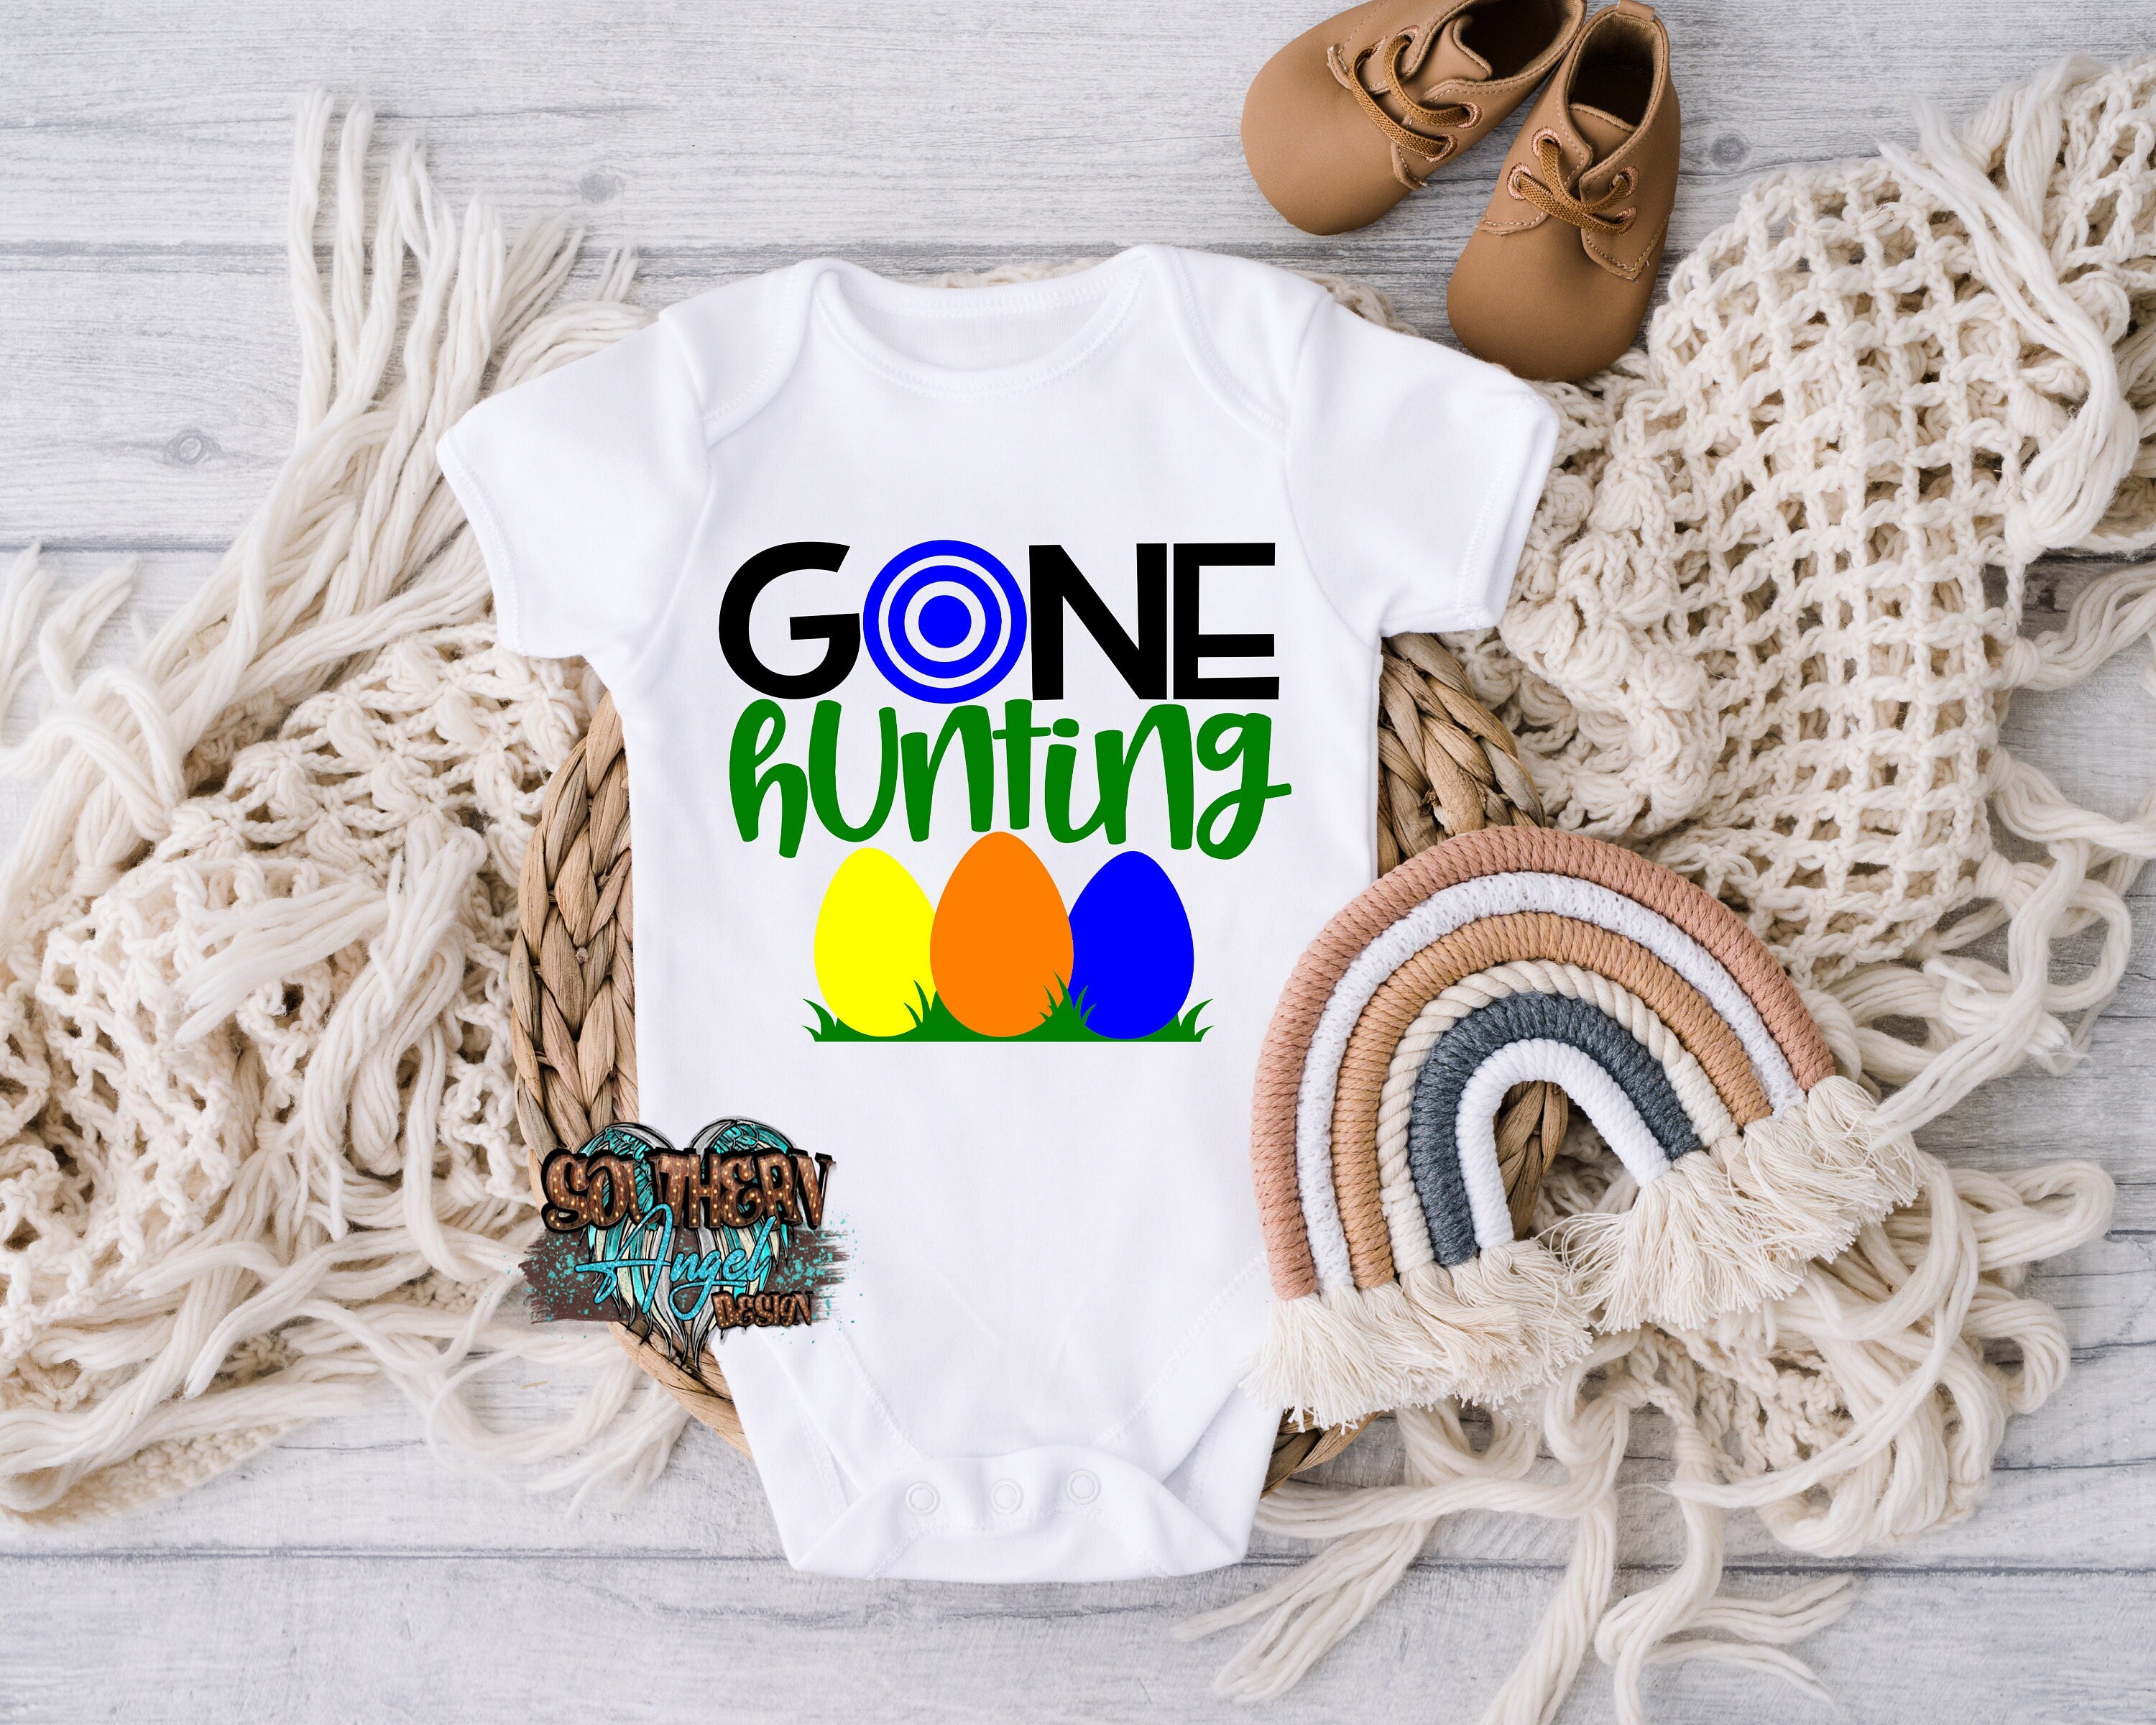 Boy's Easter shirt, Gone Hunting shirt, Toddler Easter shirt, Kids Easter shirt, Easter Bunny shirt, Girls Easter shirt, Baby Easter outfit